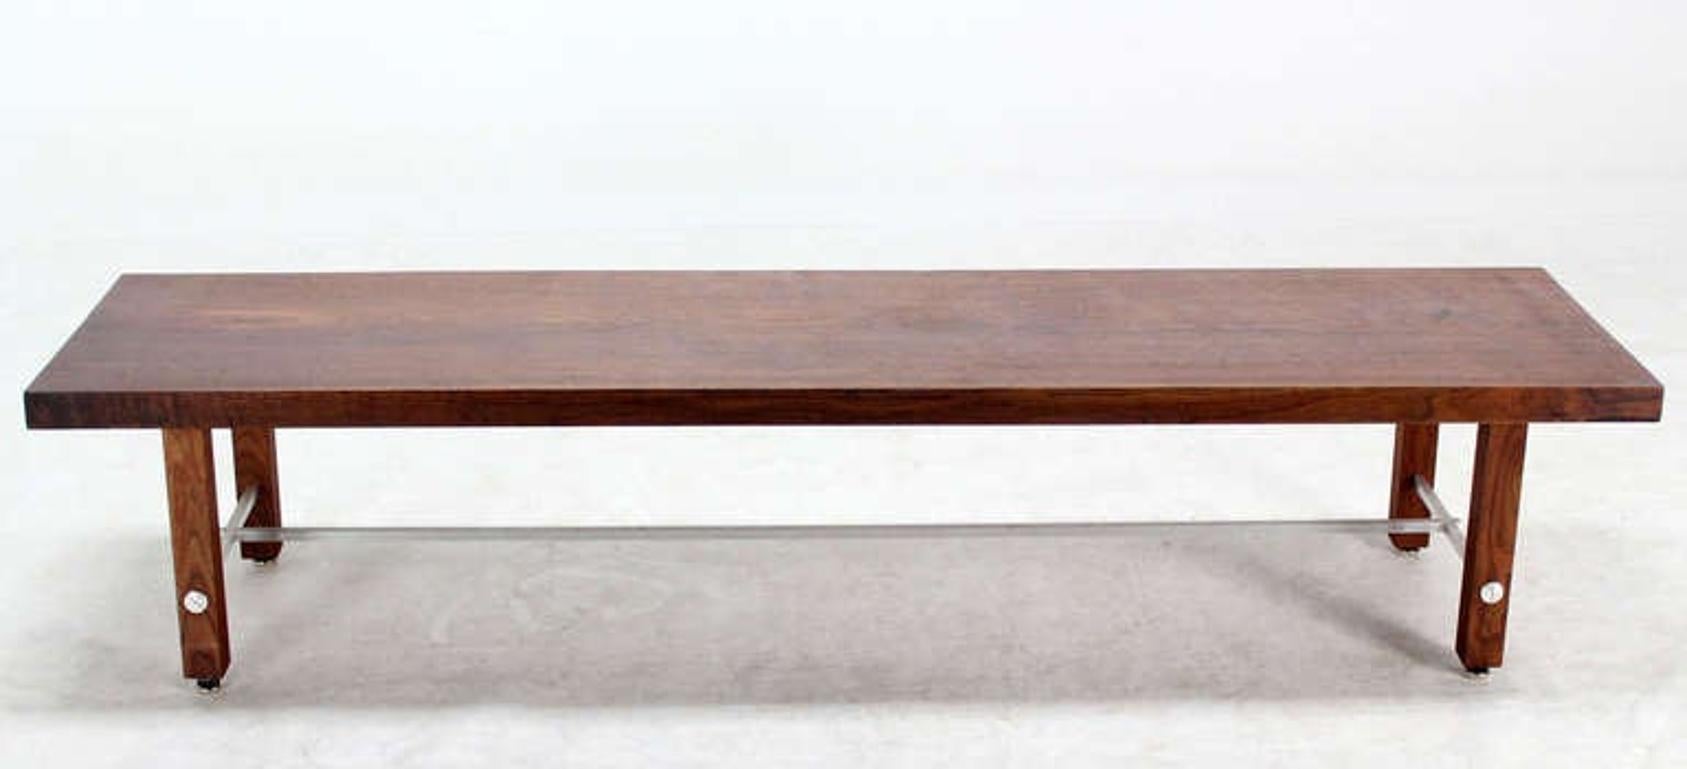 6 ' Long Solid Walnut Top Coffee Table or Bench on Solid Legs Aluminum Stretcher For Sale 2